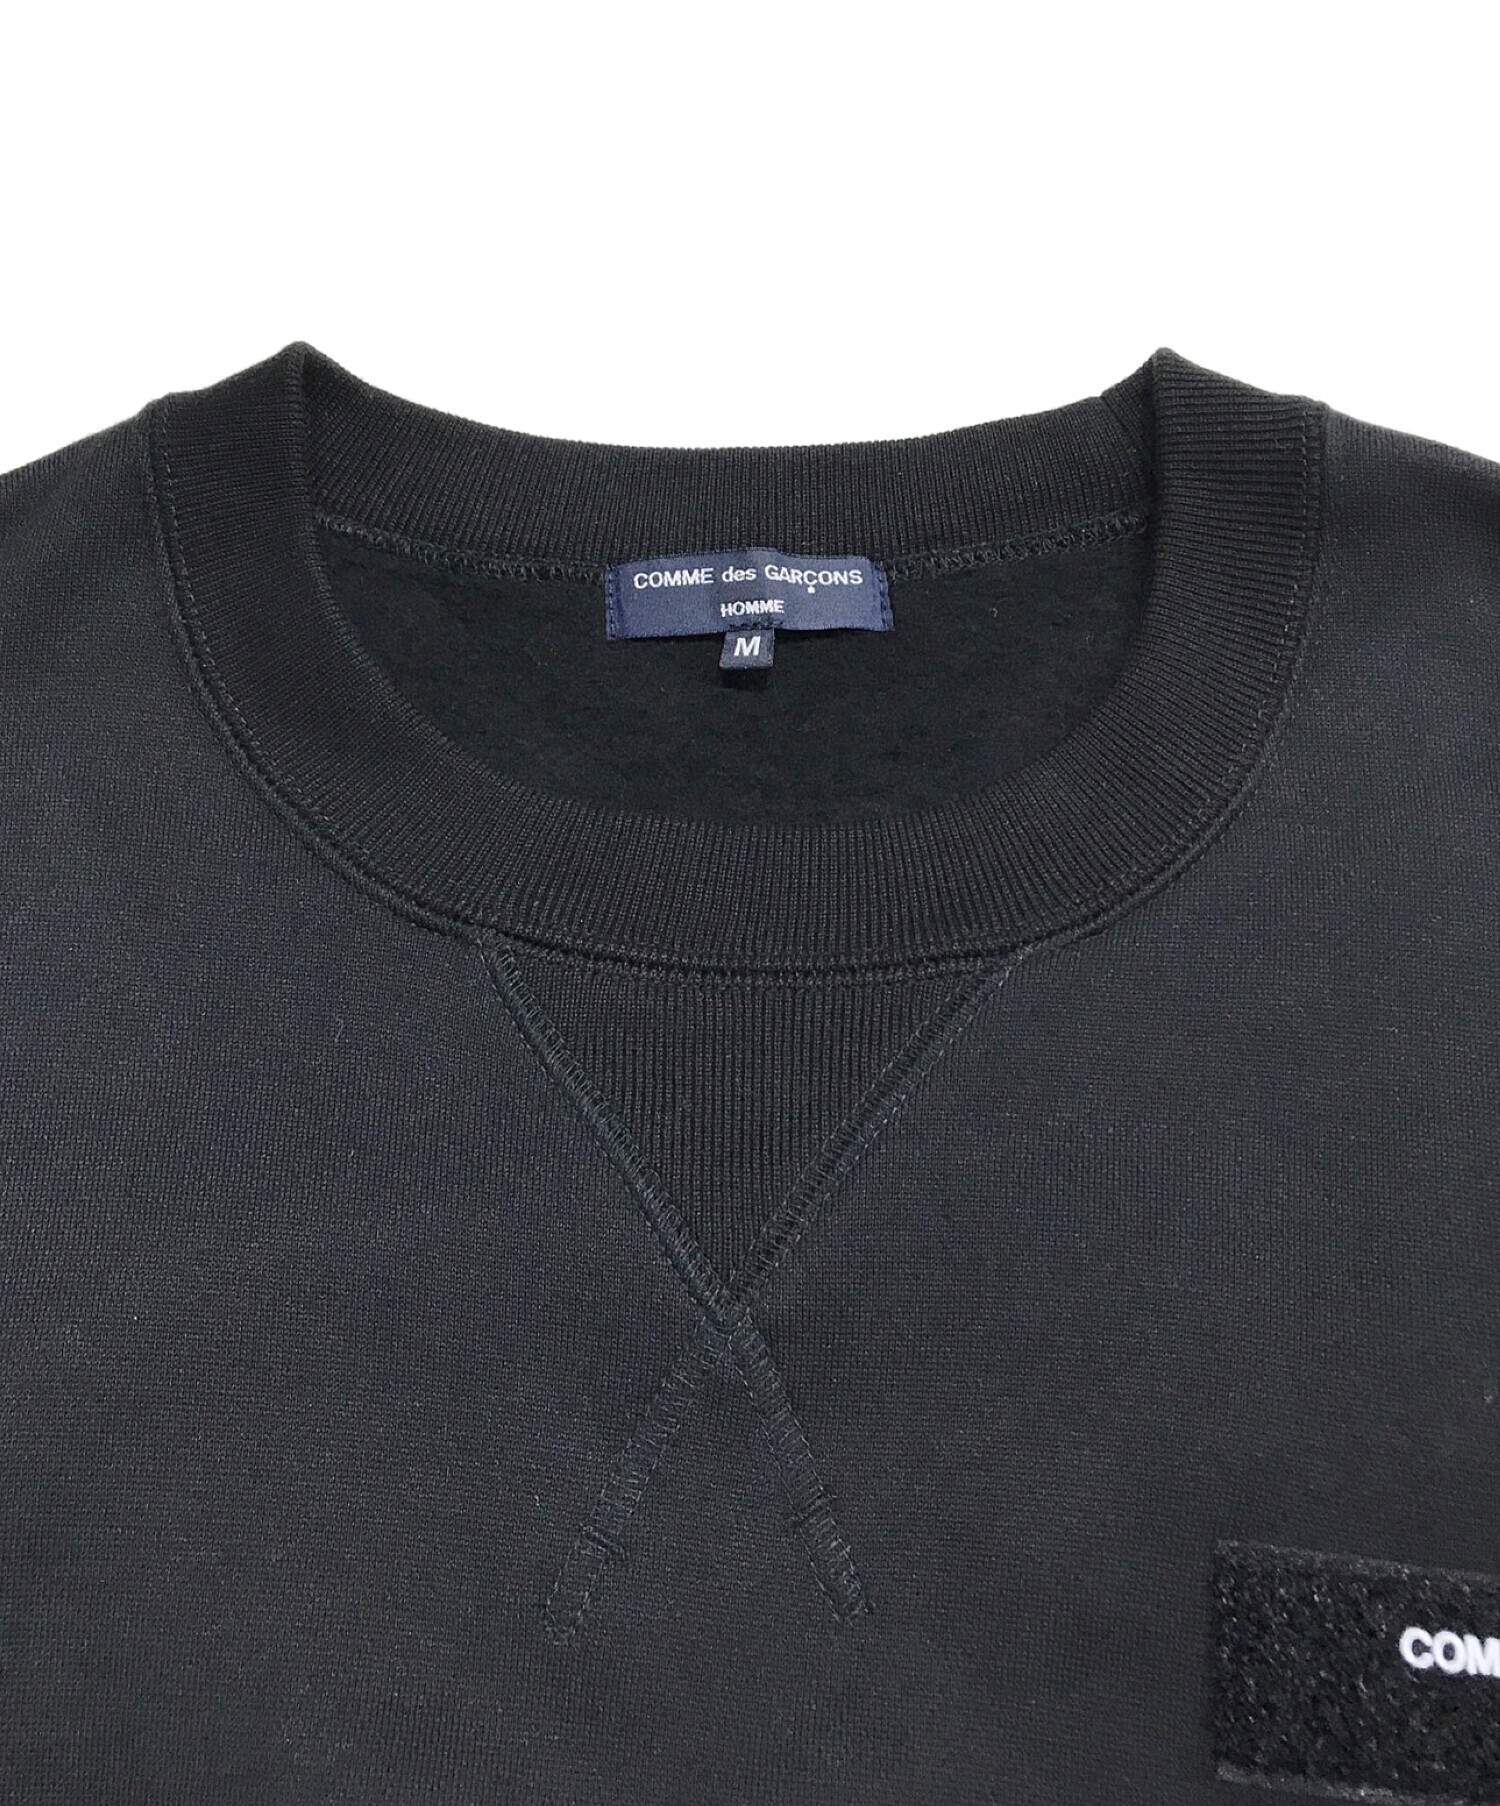 COMME des GARCONS HOMME スウェット M 黒